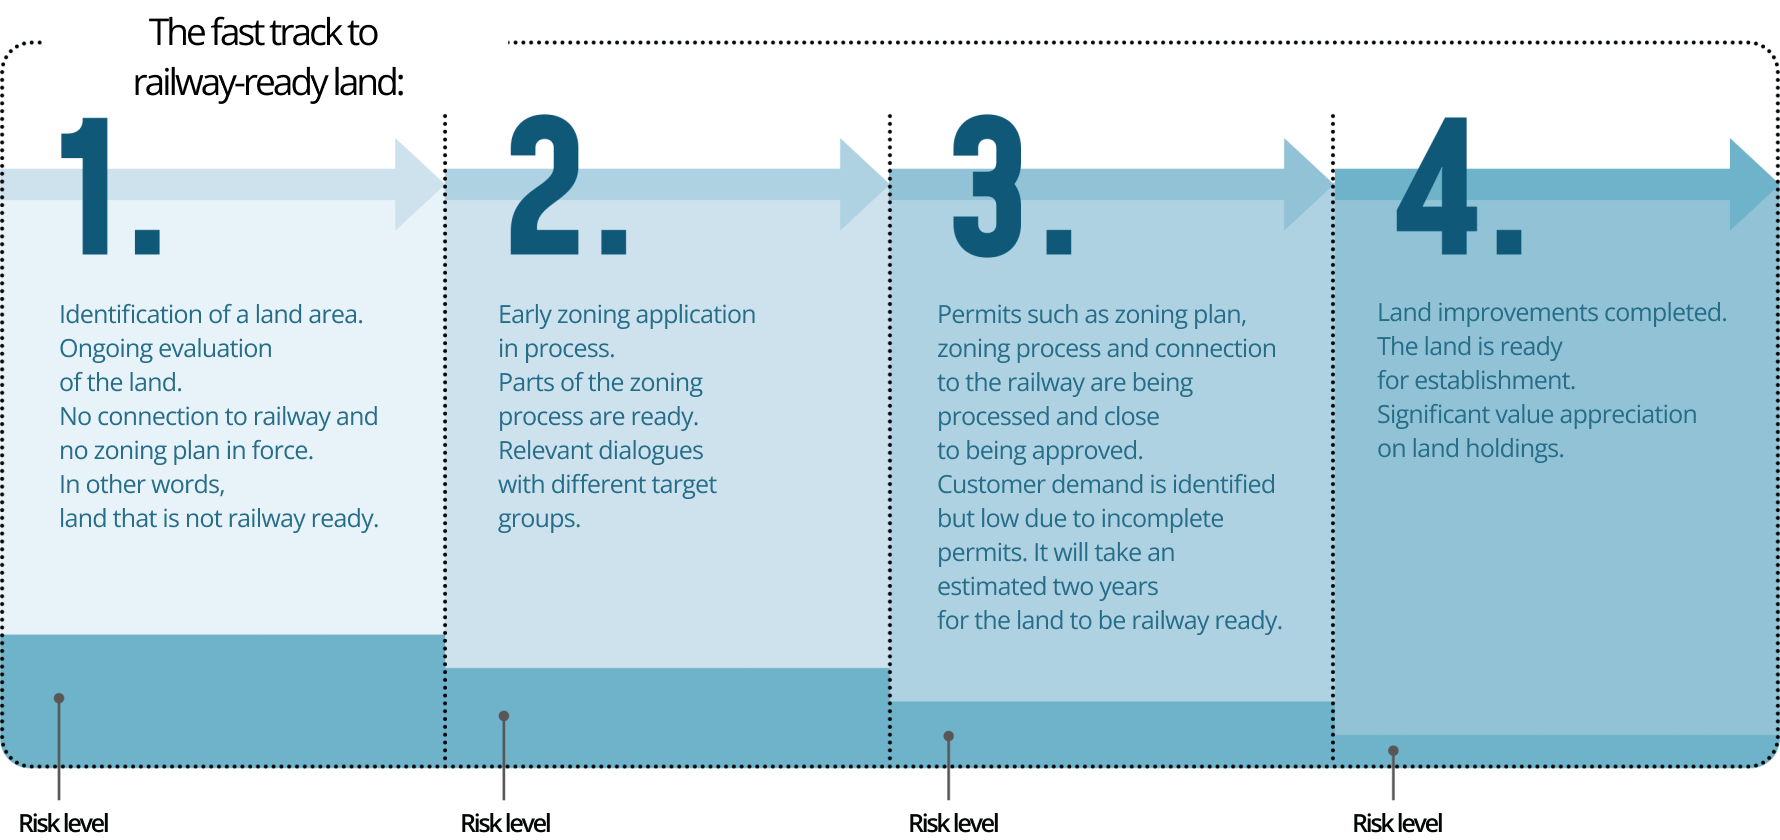 The fast track to railway-ready land: 
1.Identification of a land area. Ongoing evaluation of the land. No connection to railway and no zoning plan in force. In other words, land that is not railway ready.
2. Early zoning application in process. Parts of the zoning process are ready. Relevant dialogues with different target groups.
3.Permits such as zoning plan, zoning process and connection to the railway are being processed and close to being approved. Customer demand is identified but low due to incomplete permits. It will take an estimated two years for the land to be railway ready.
4.Land improvements completed. The land is ready for establishment. Significant value appreciation on land holdings. 
